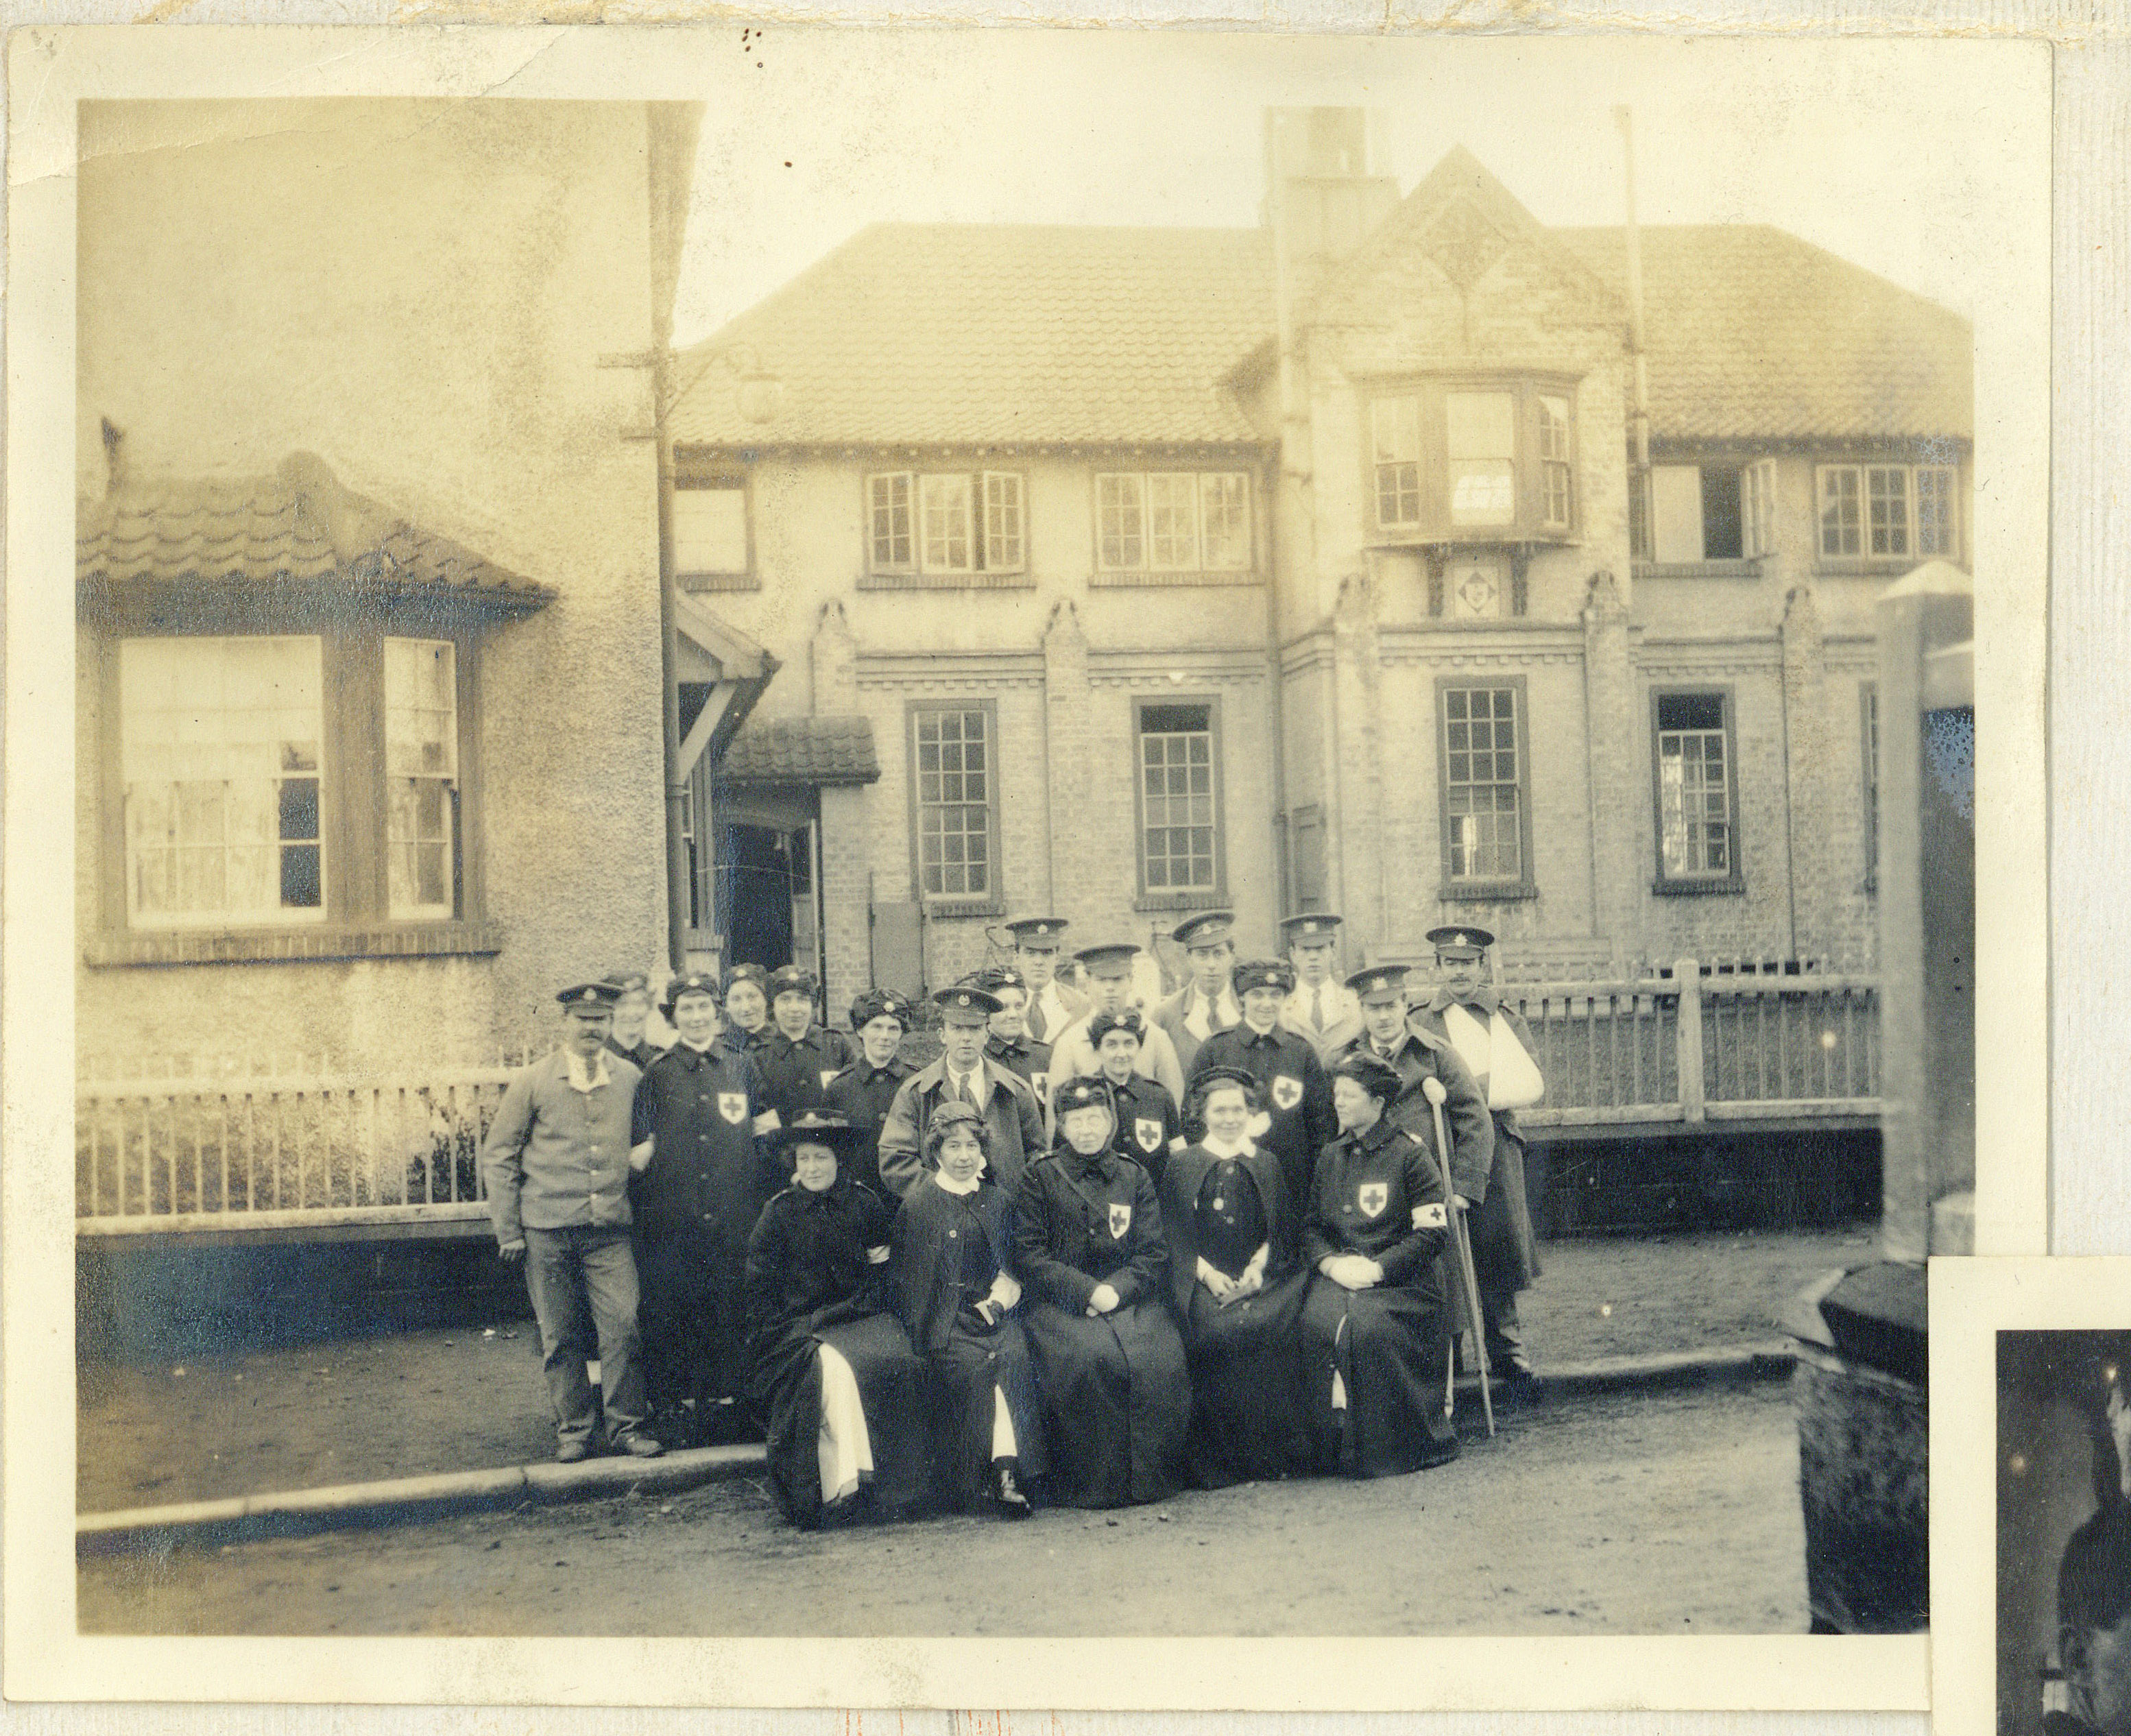 Nurses outside the auxiliary Hospital at Rounton Grange, New Years Eve, 1916 (Charles Philips Trevelyan Archive, CPT/PA/6/)